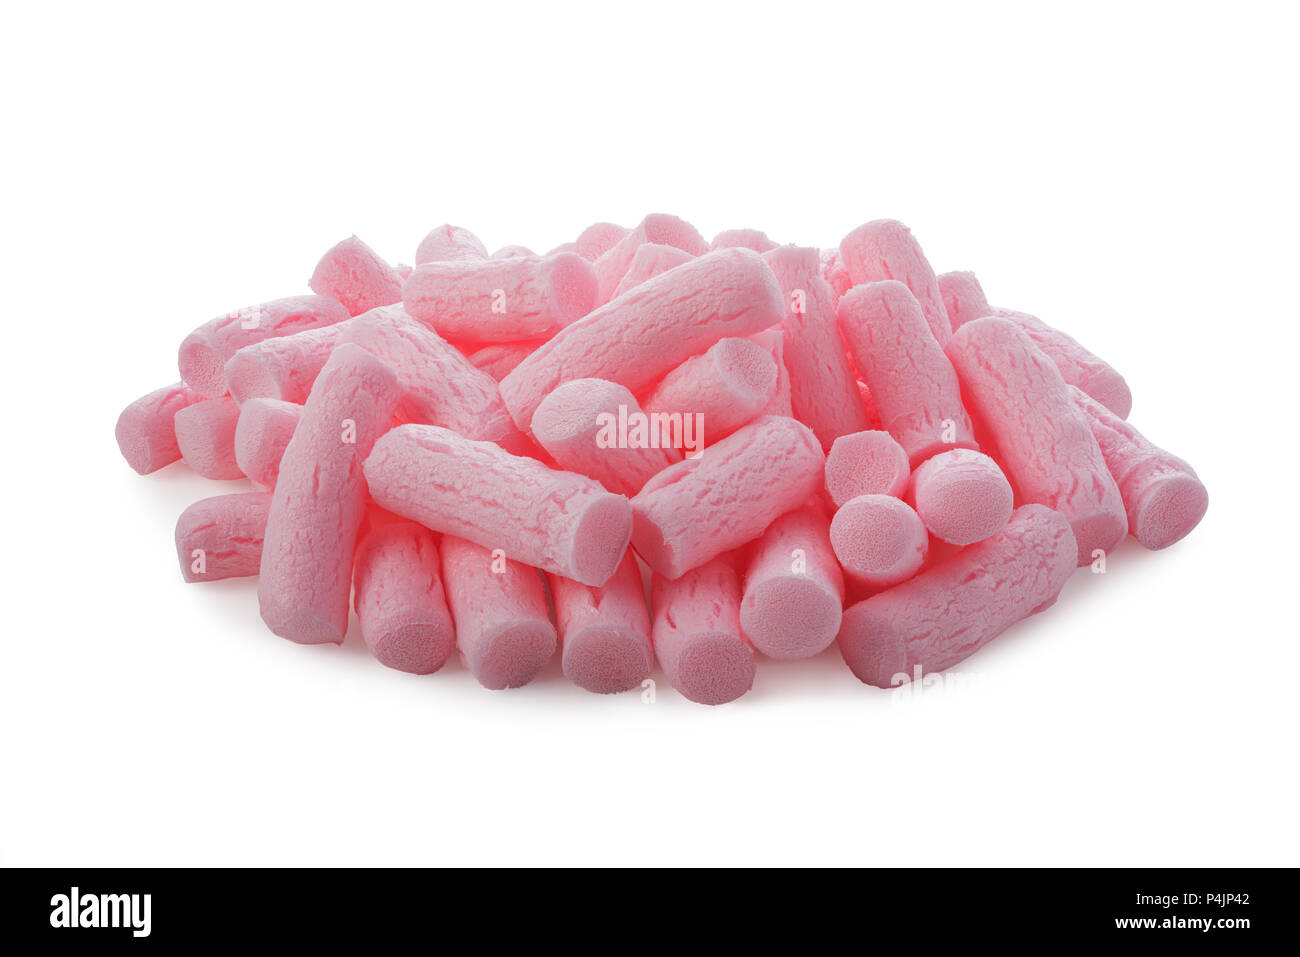 Pile of pink packing foam peanuts isolated on white background Stock Photo